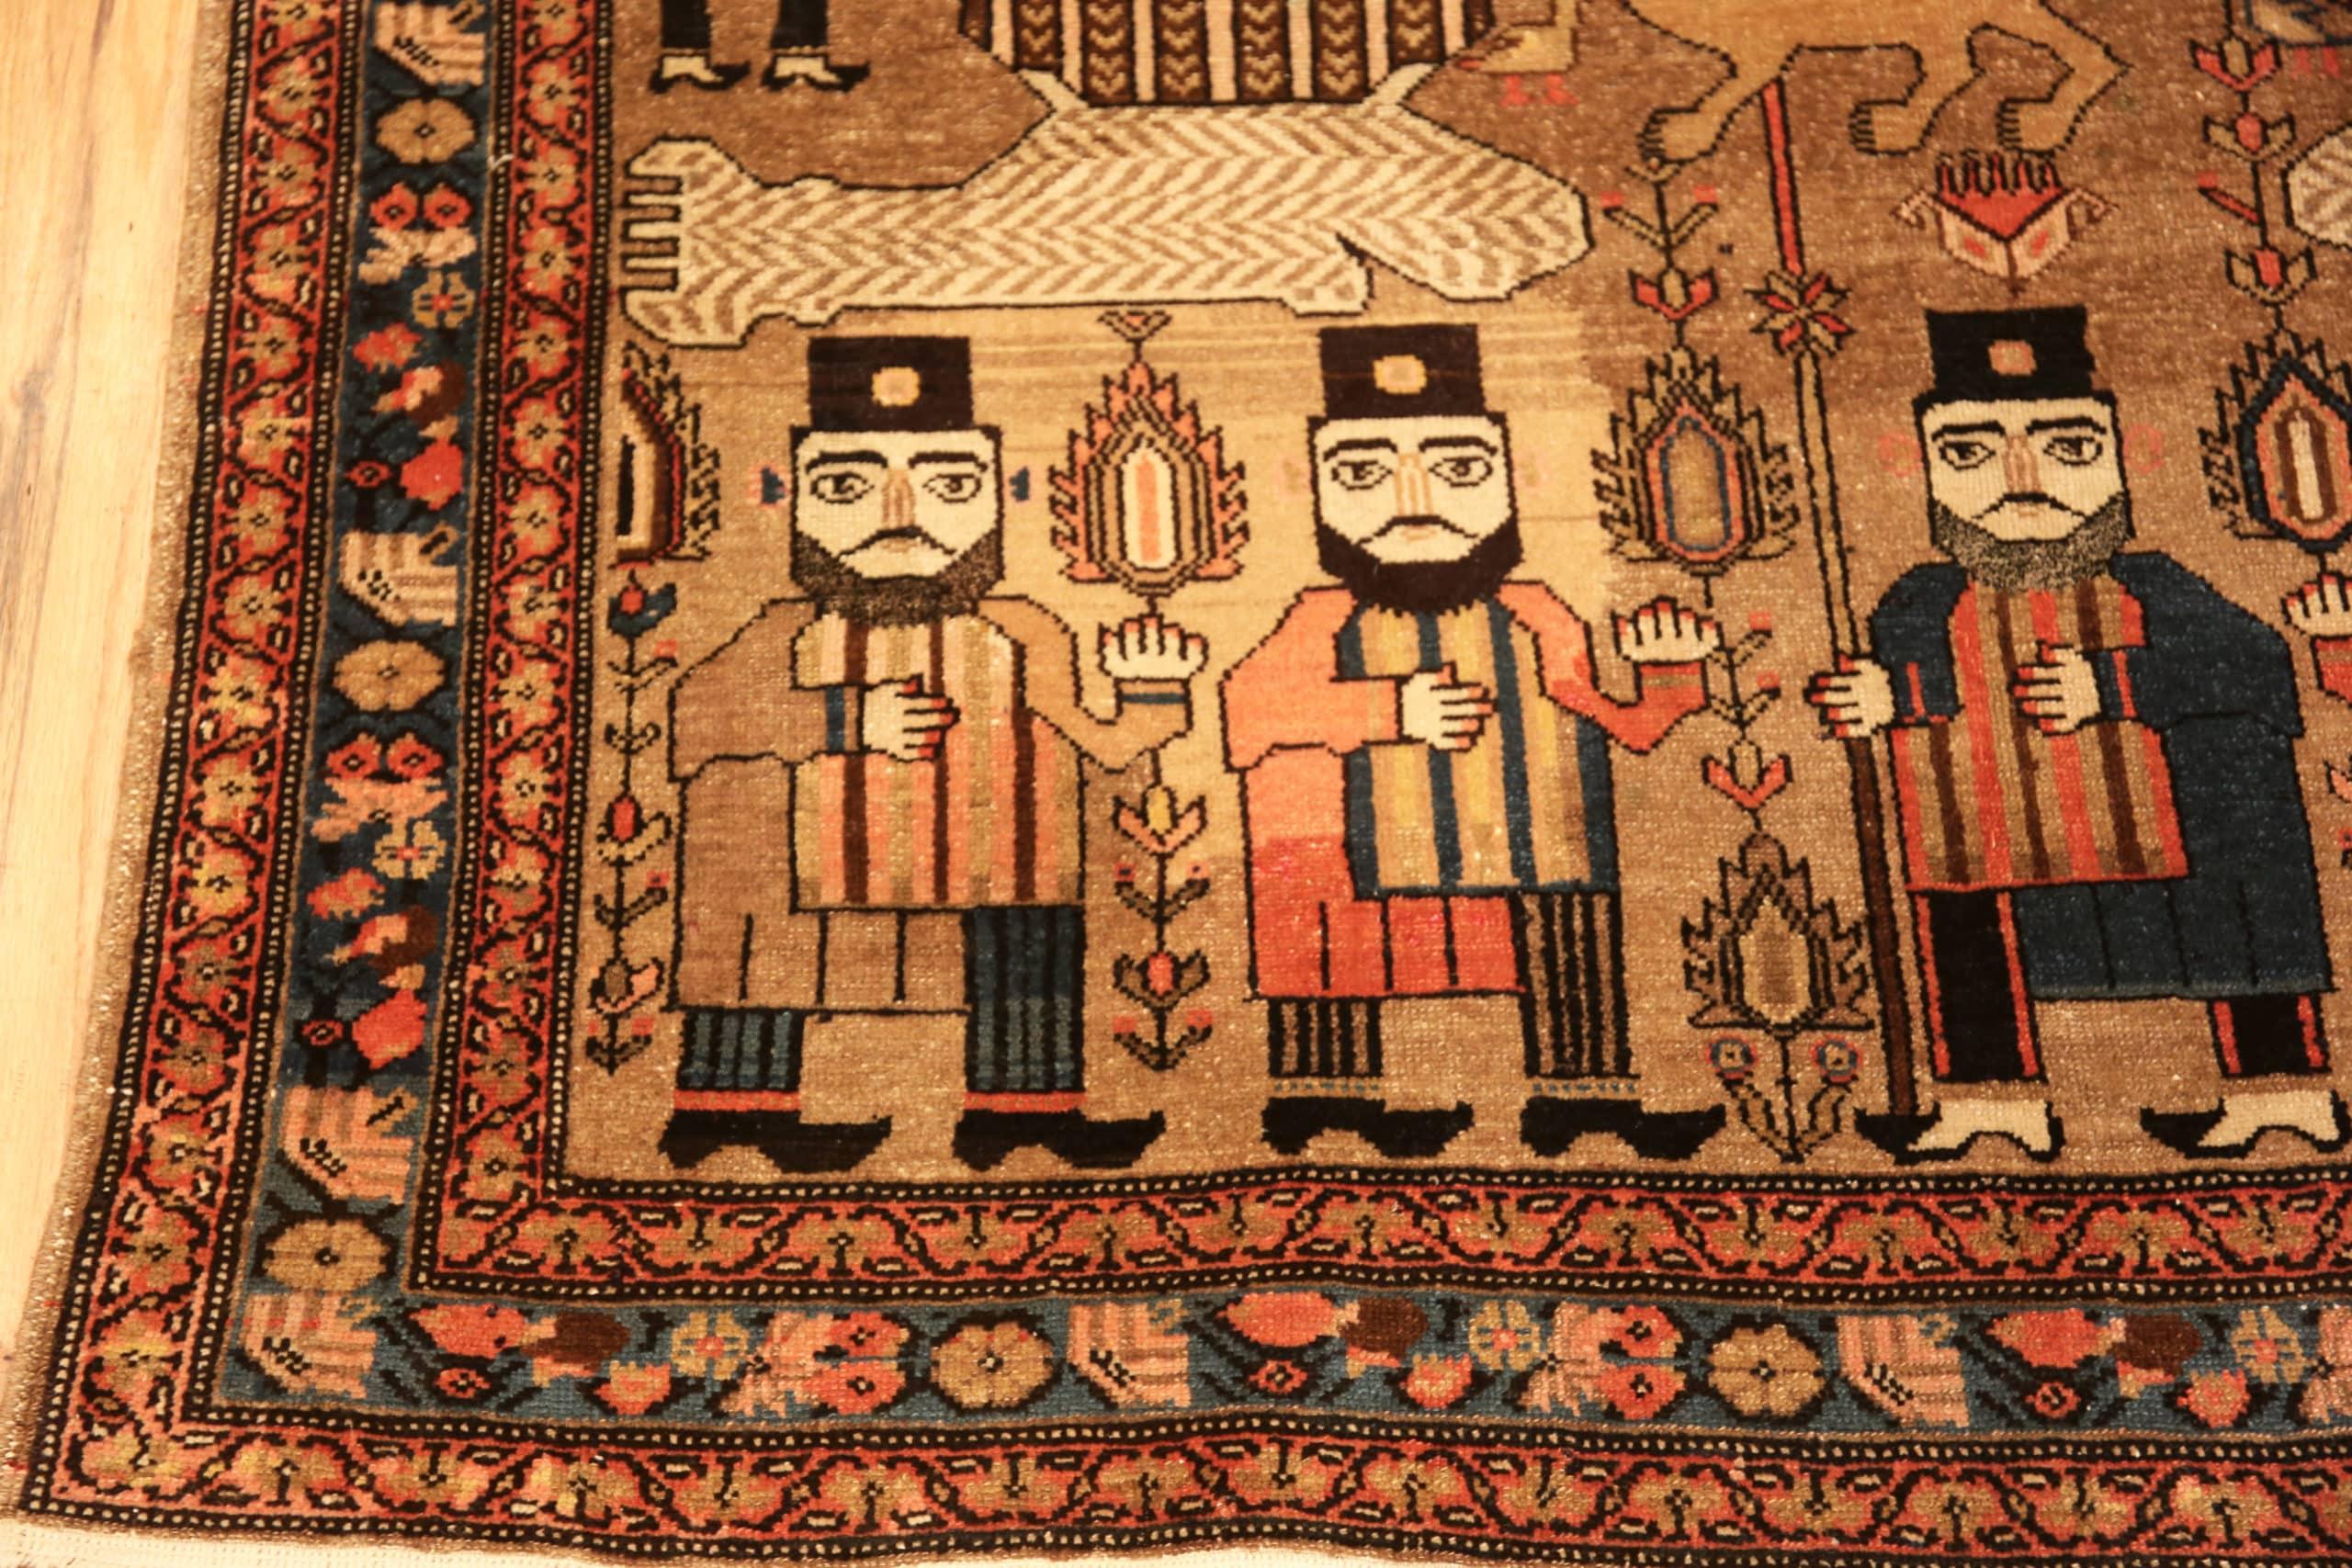 Antique Persian Pictorial Bakshaish Rug. 4 ft 9 in x 6 ft 8 in In Good Condition For Sale In New York, NY